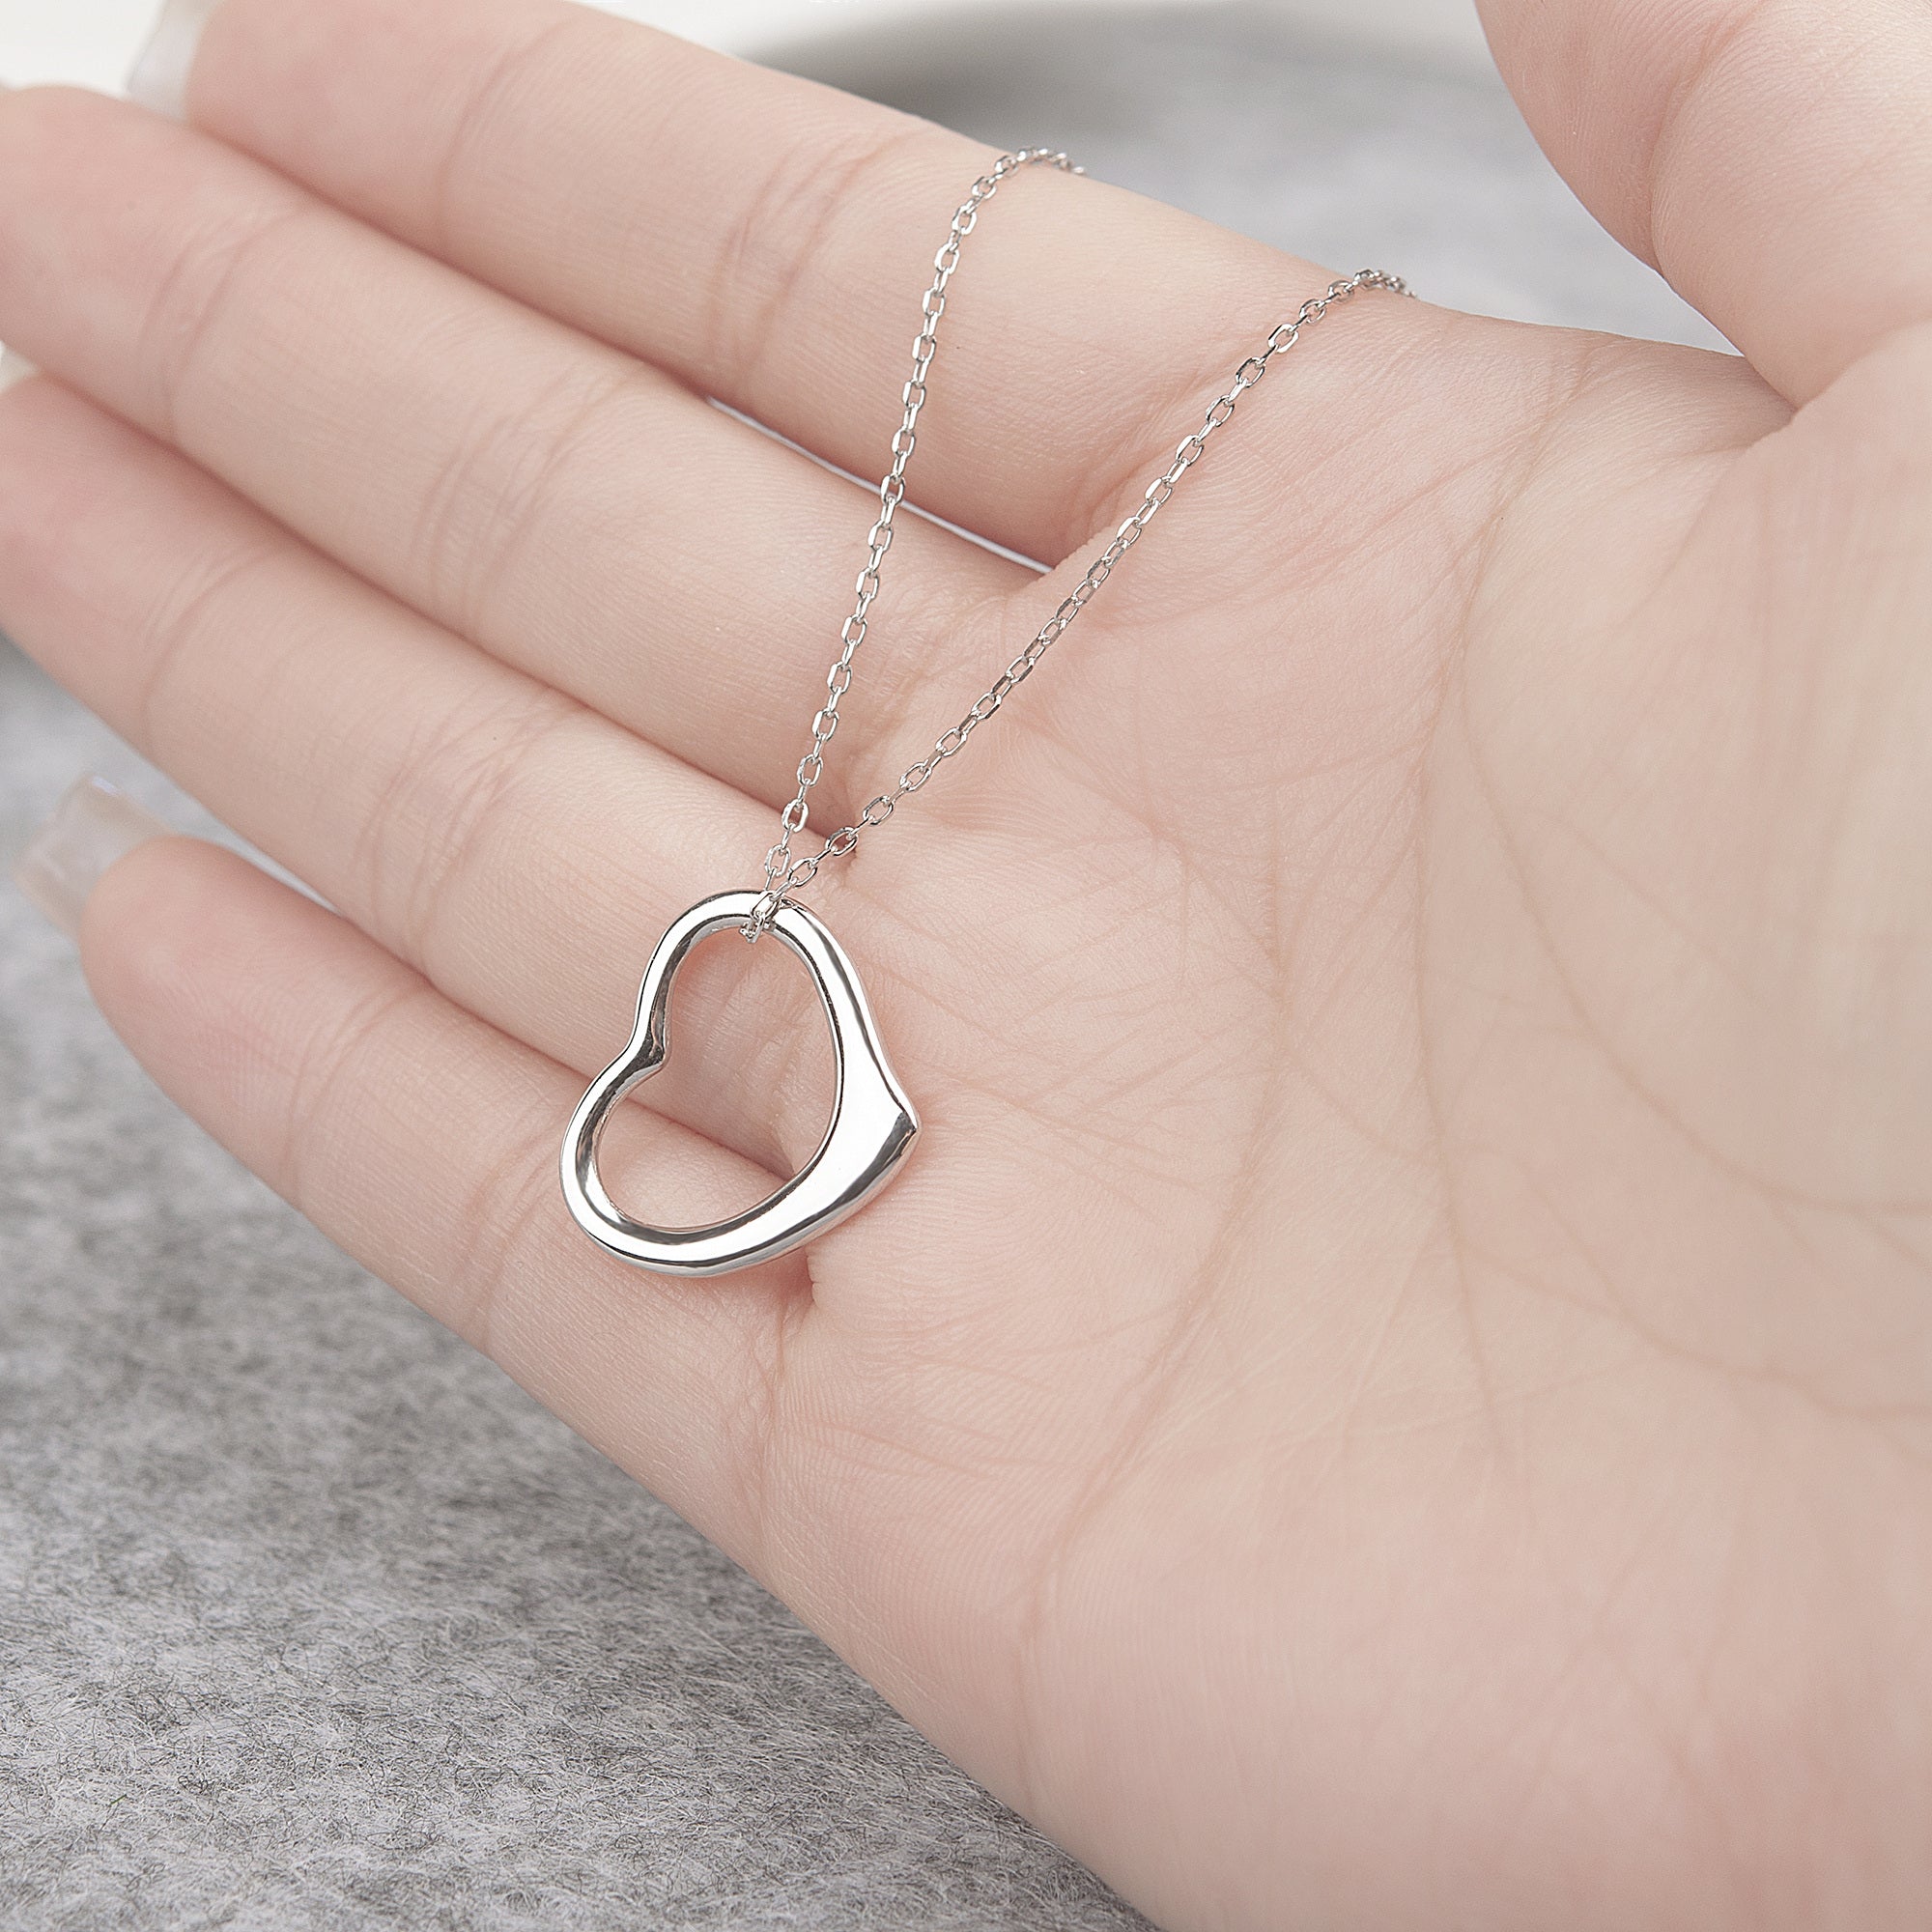 Heart Necklace Gift for Wife Gift for Girlfriend To my Soulmate I Love You  -N388 | eBay